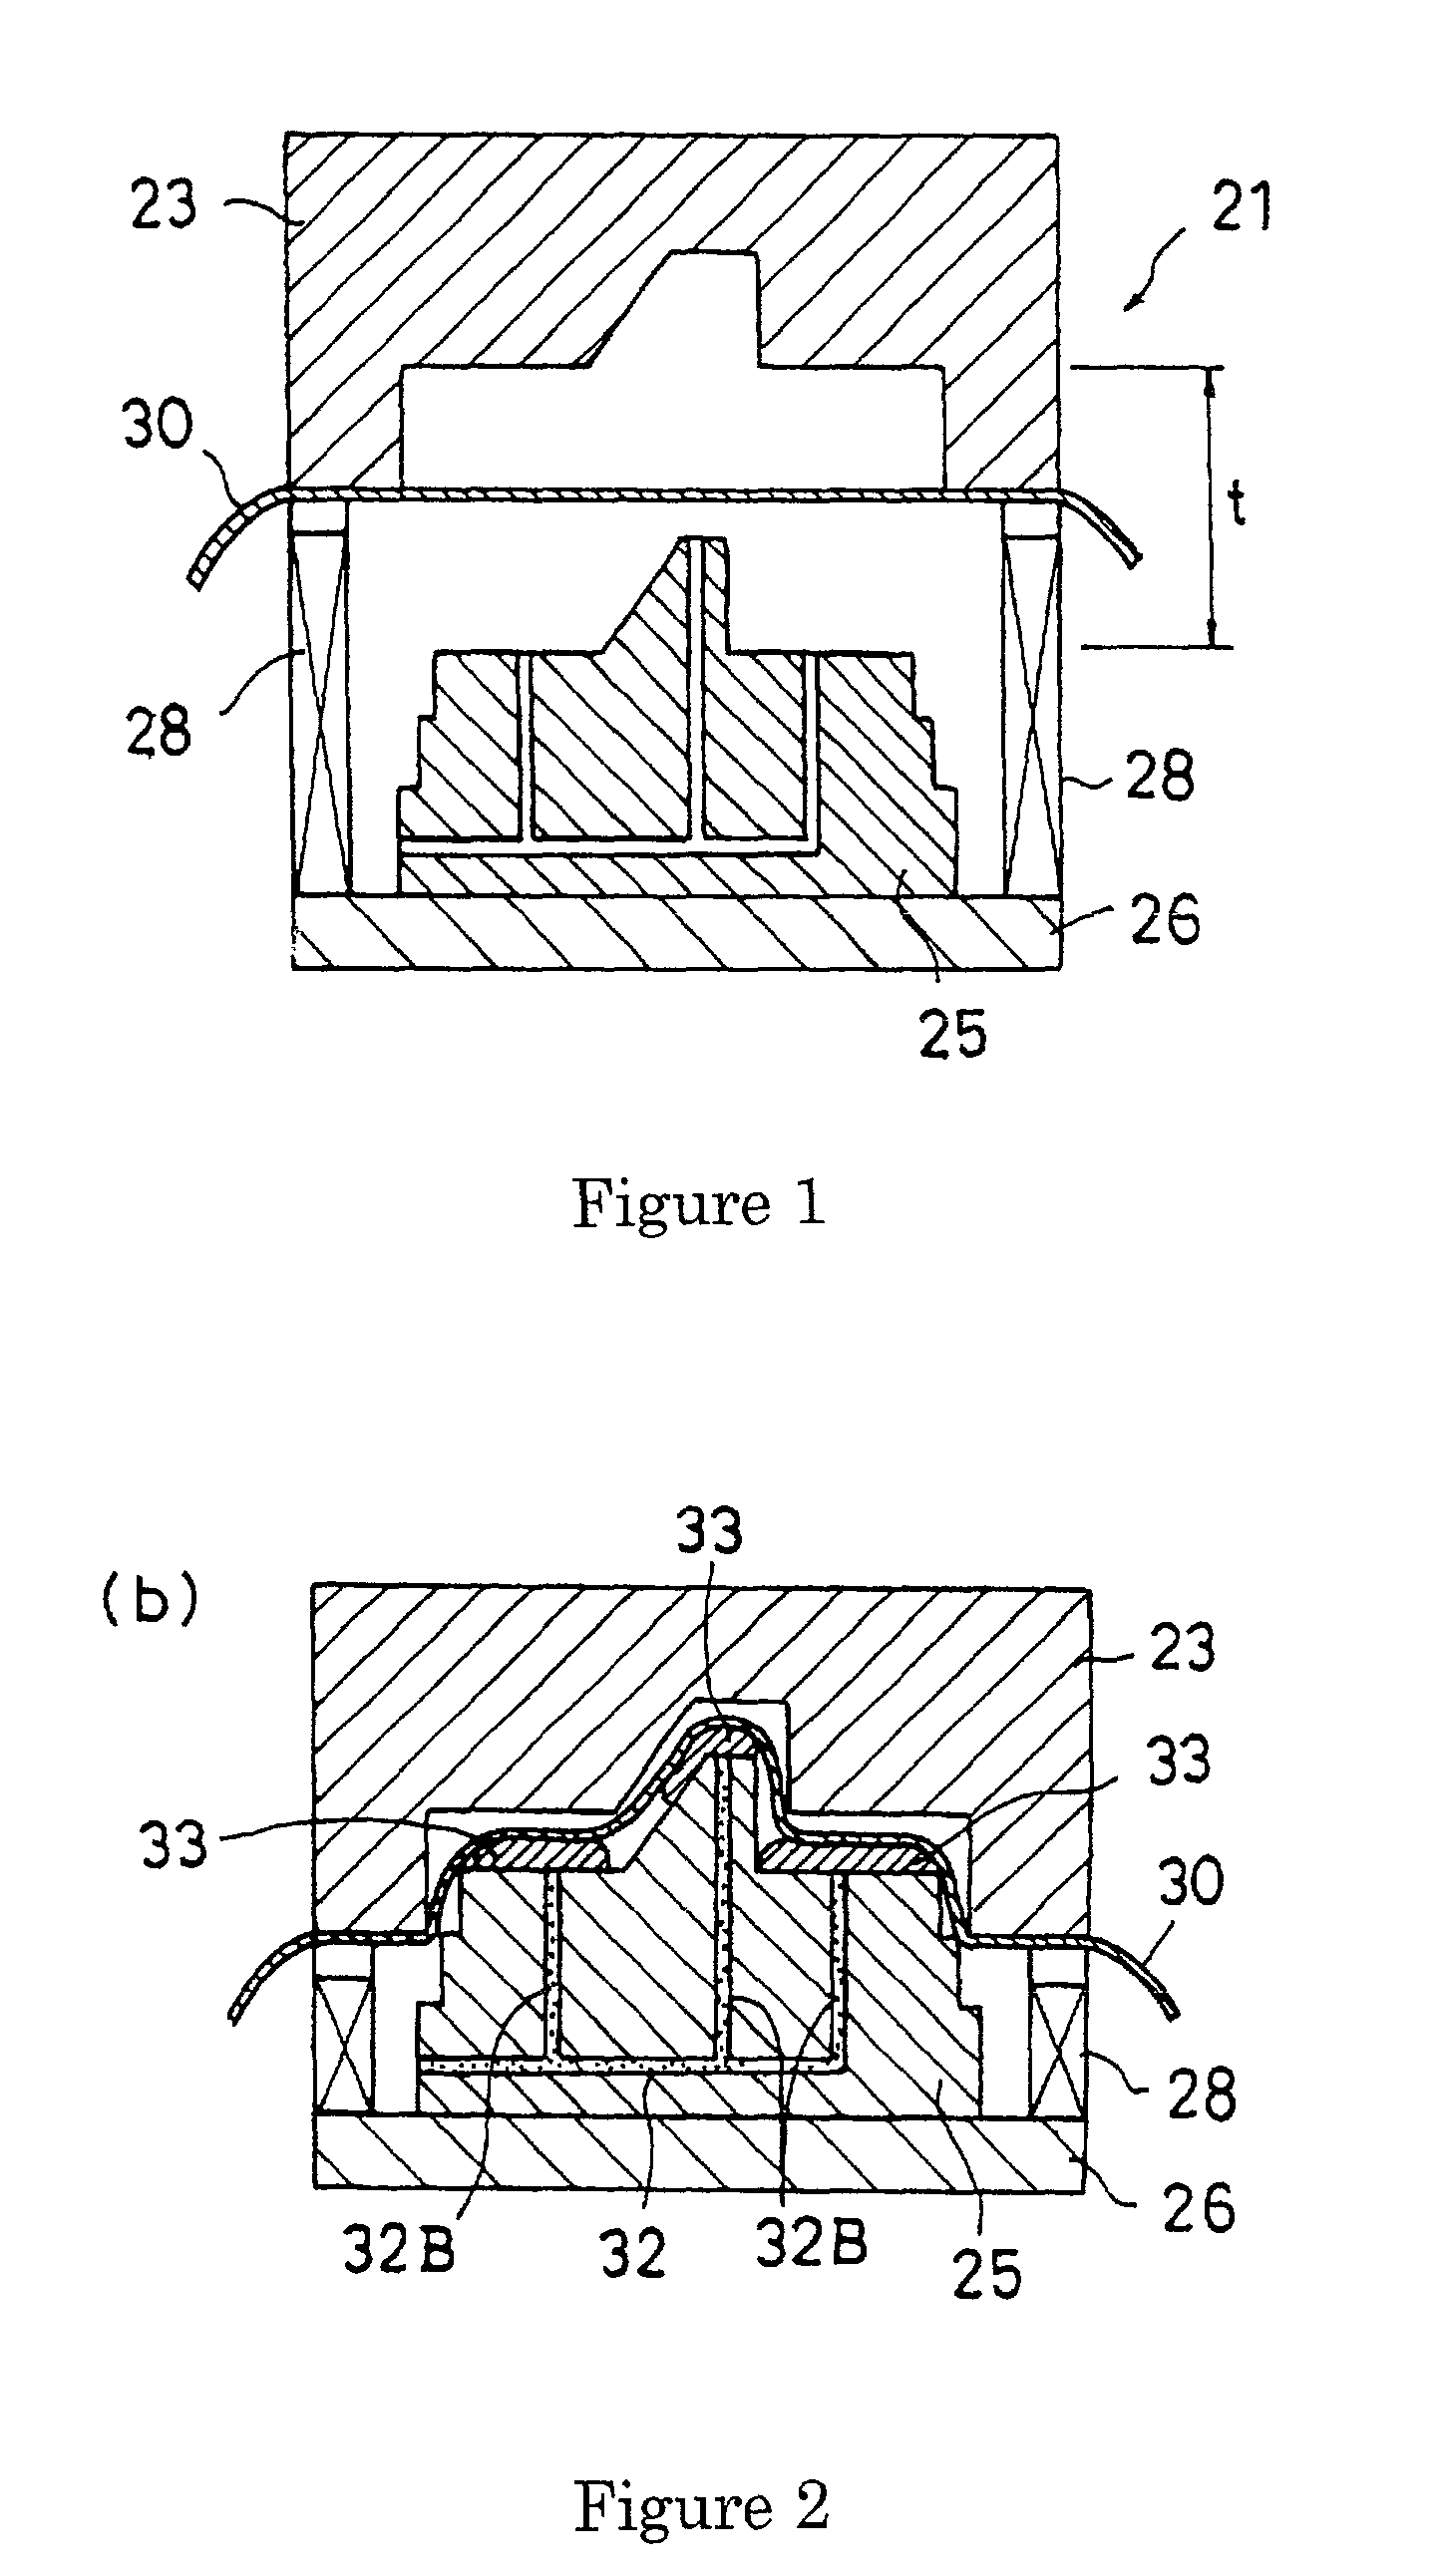 Process for producing a skin material-laminated foamed thermoplastic resin molding and foamed thermoplastic resin moldings